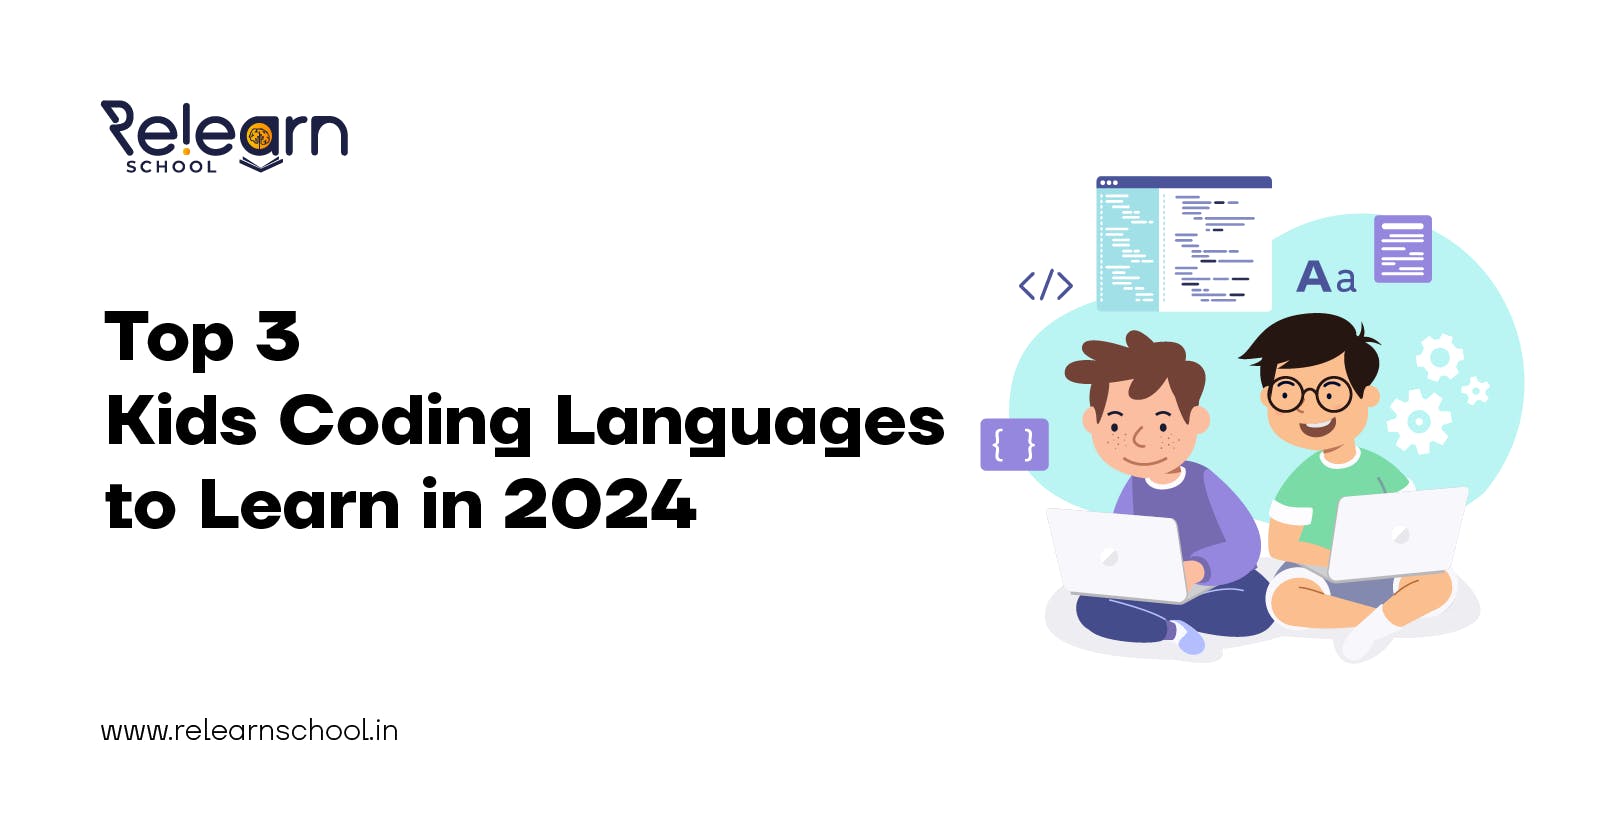 Top 3 Kids Coding Languages to Learn in 2024